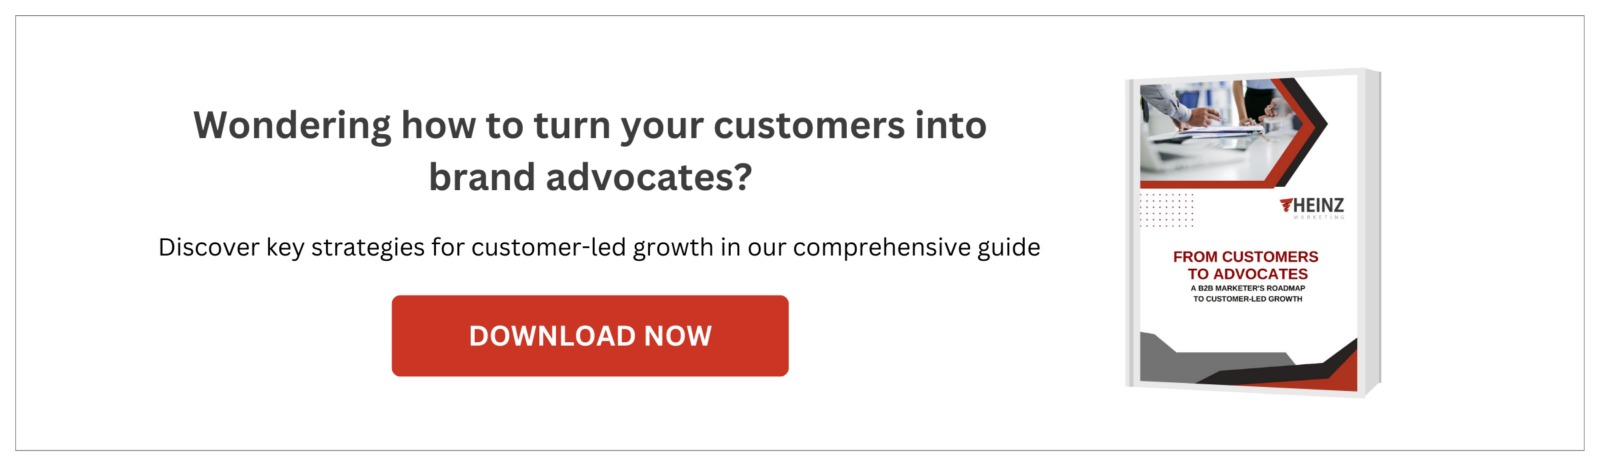 From customers to brand advocates guide from Heinz Marketing